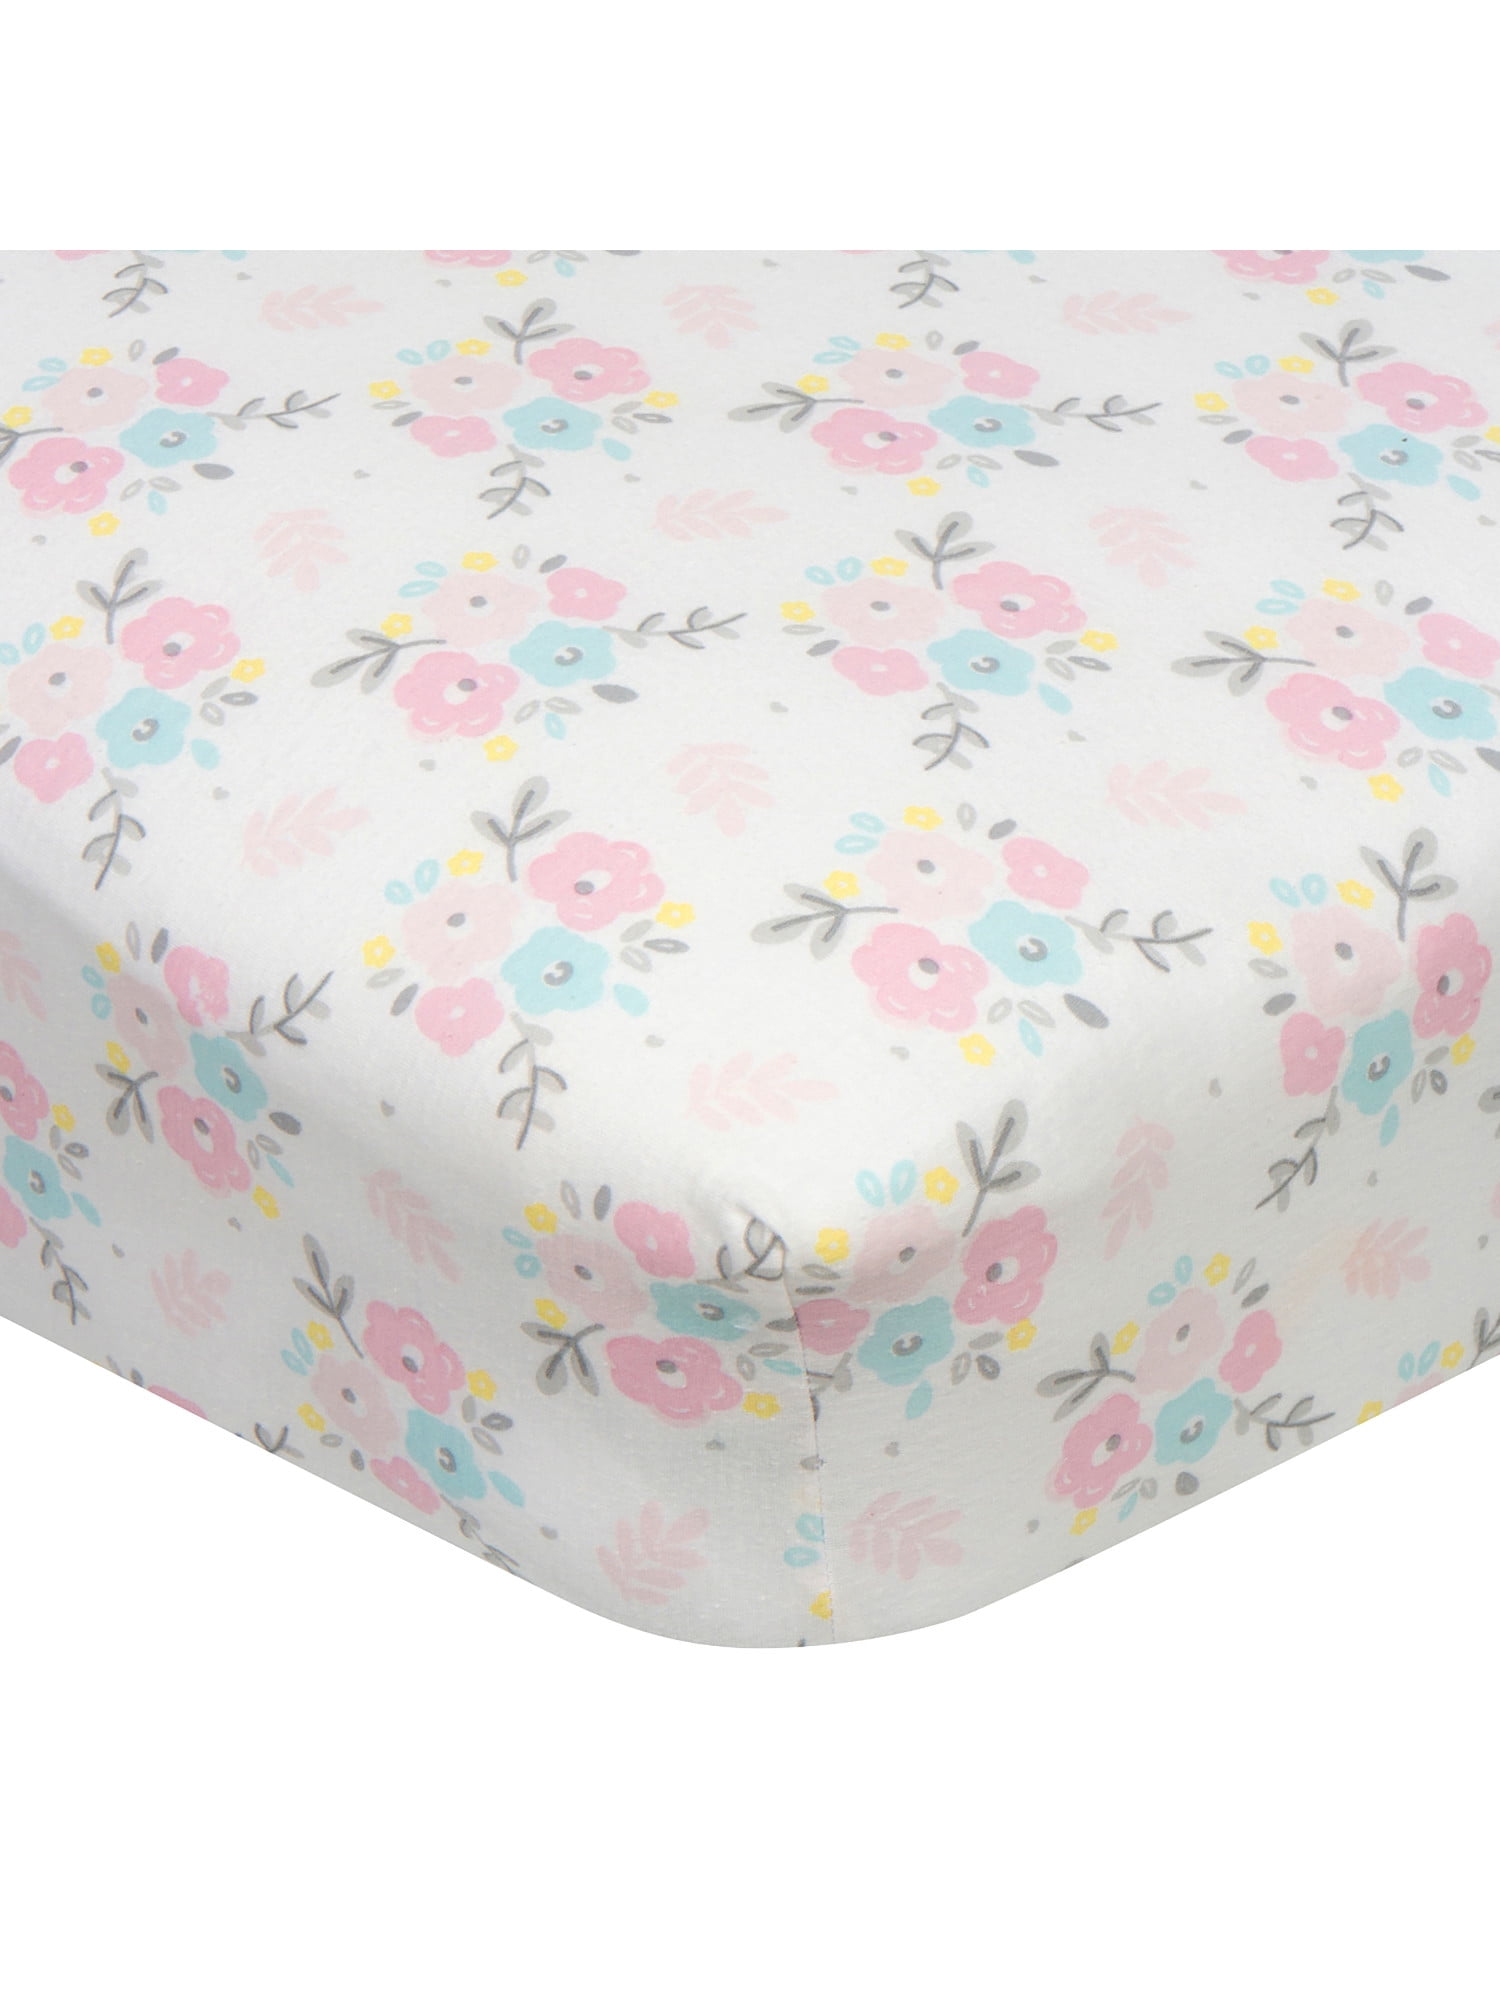 FITTED PRAM BOYS/GIRLS FITTED SHEETS COTTON 2 PACK BABY WHITE,CREAM,PINK,BLUE 